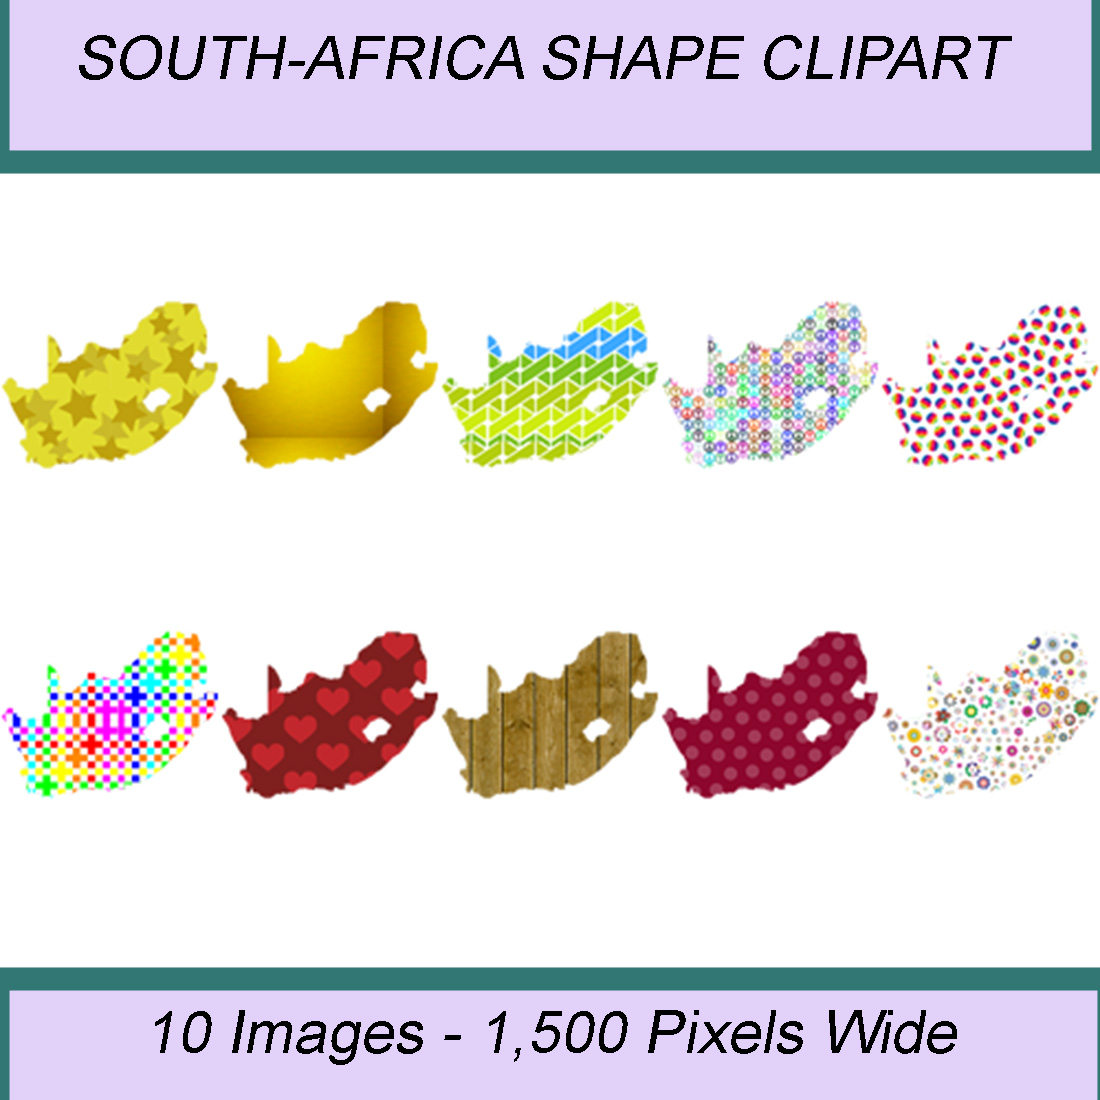 SOUTH-AFRICA SHAPE CLIPART ICONS cover image.